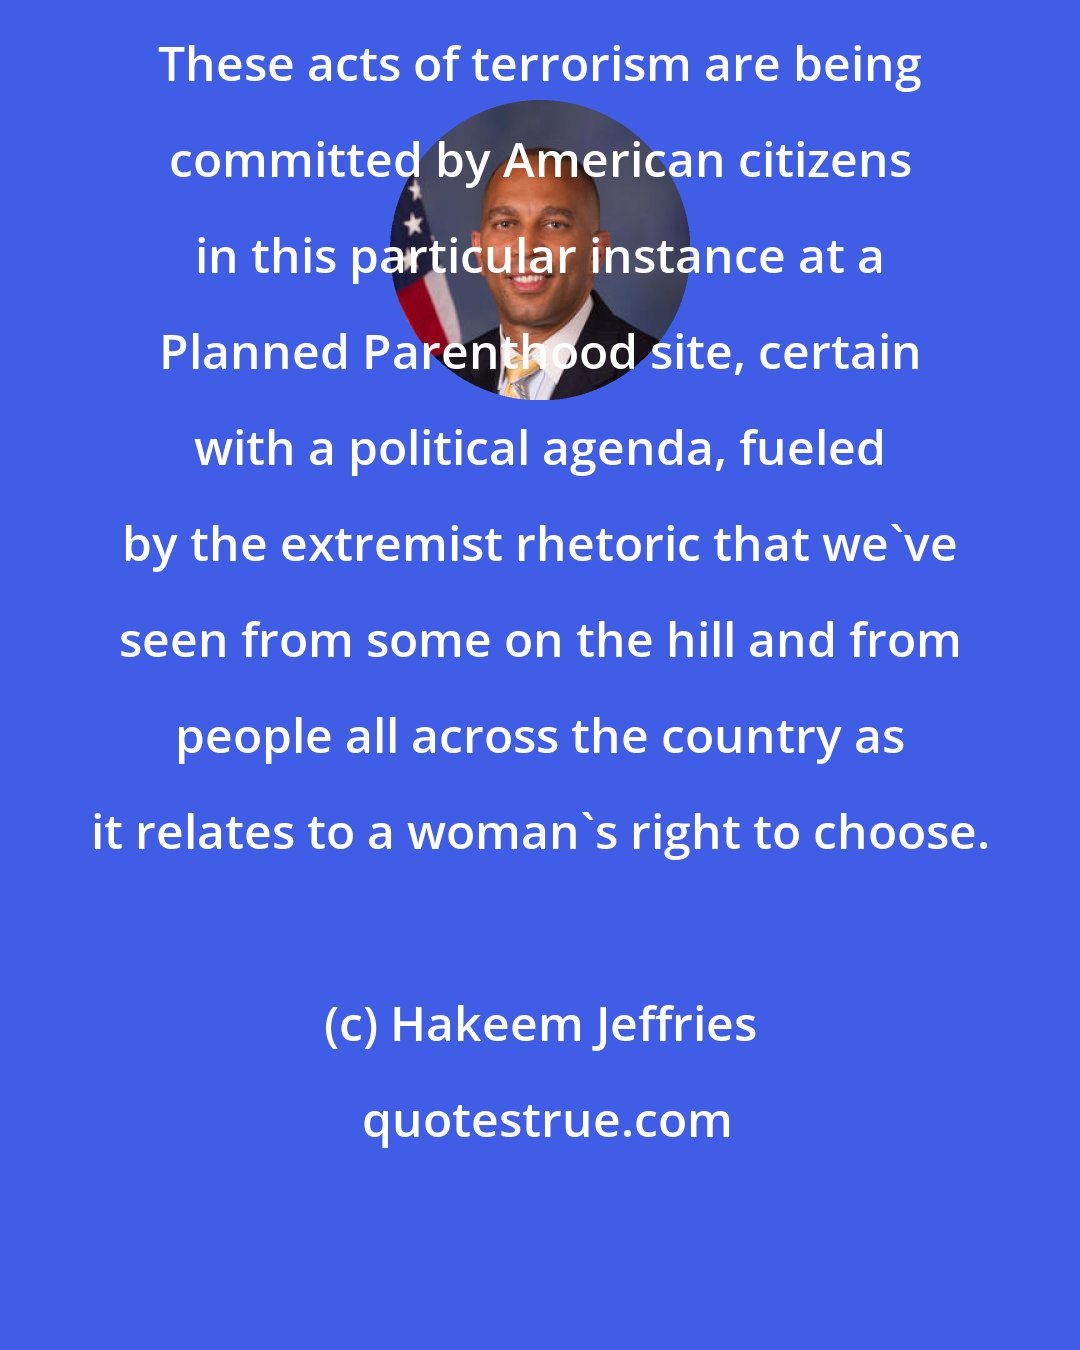 Hakeem Jeffries: These acts of terrorism are being committed by American citizens in this particular instance at a Planned Parenthood site, certain with a political agenda, fueled by the extremist rhetoric that we`ve seen from some on the hill and from people all across the country as it relates to a woman`s right to choose.